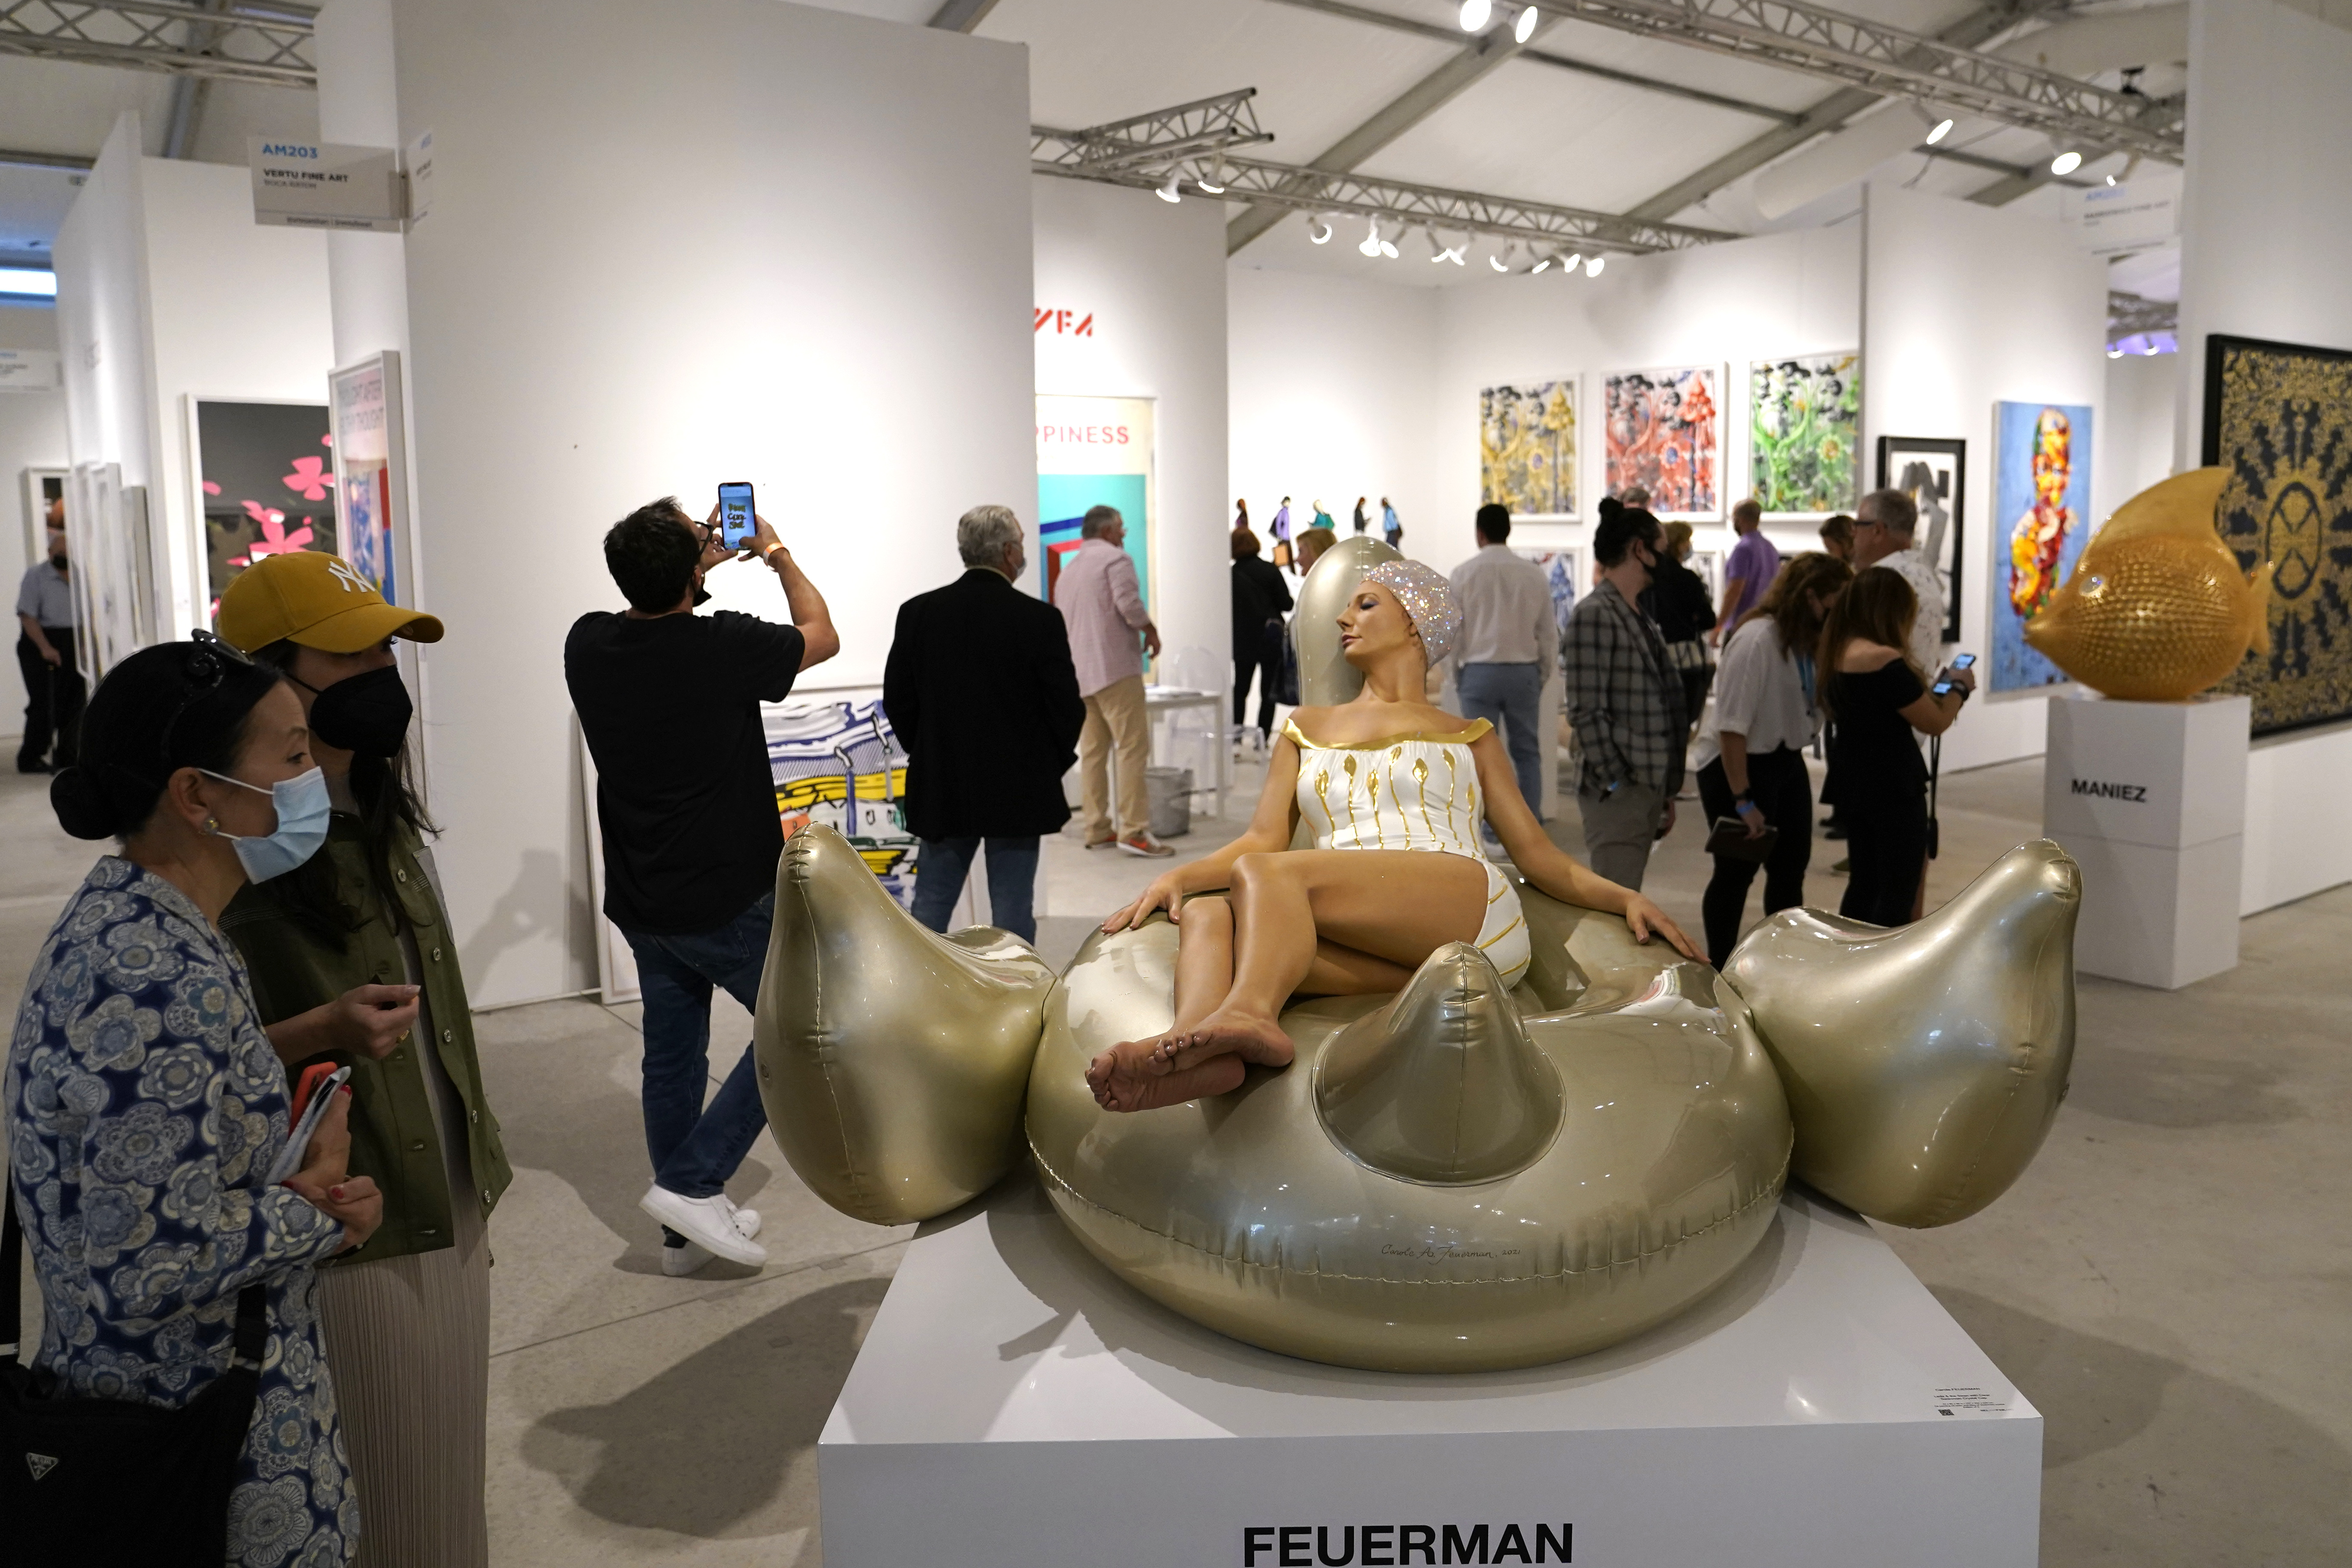 Louis Vuitton Exhibited Selected Works at Art Basel Miami Beach